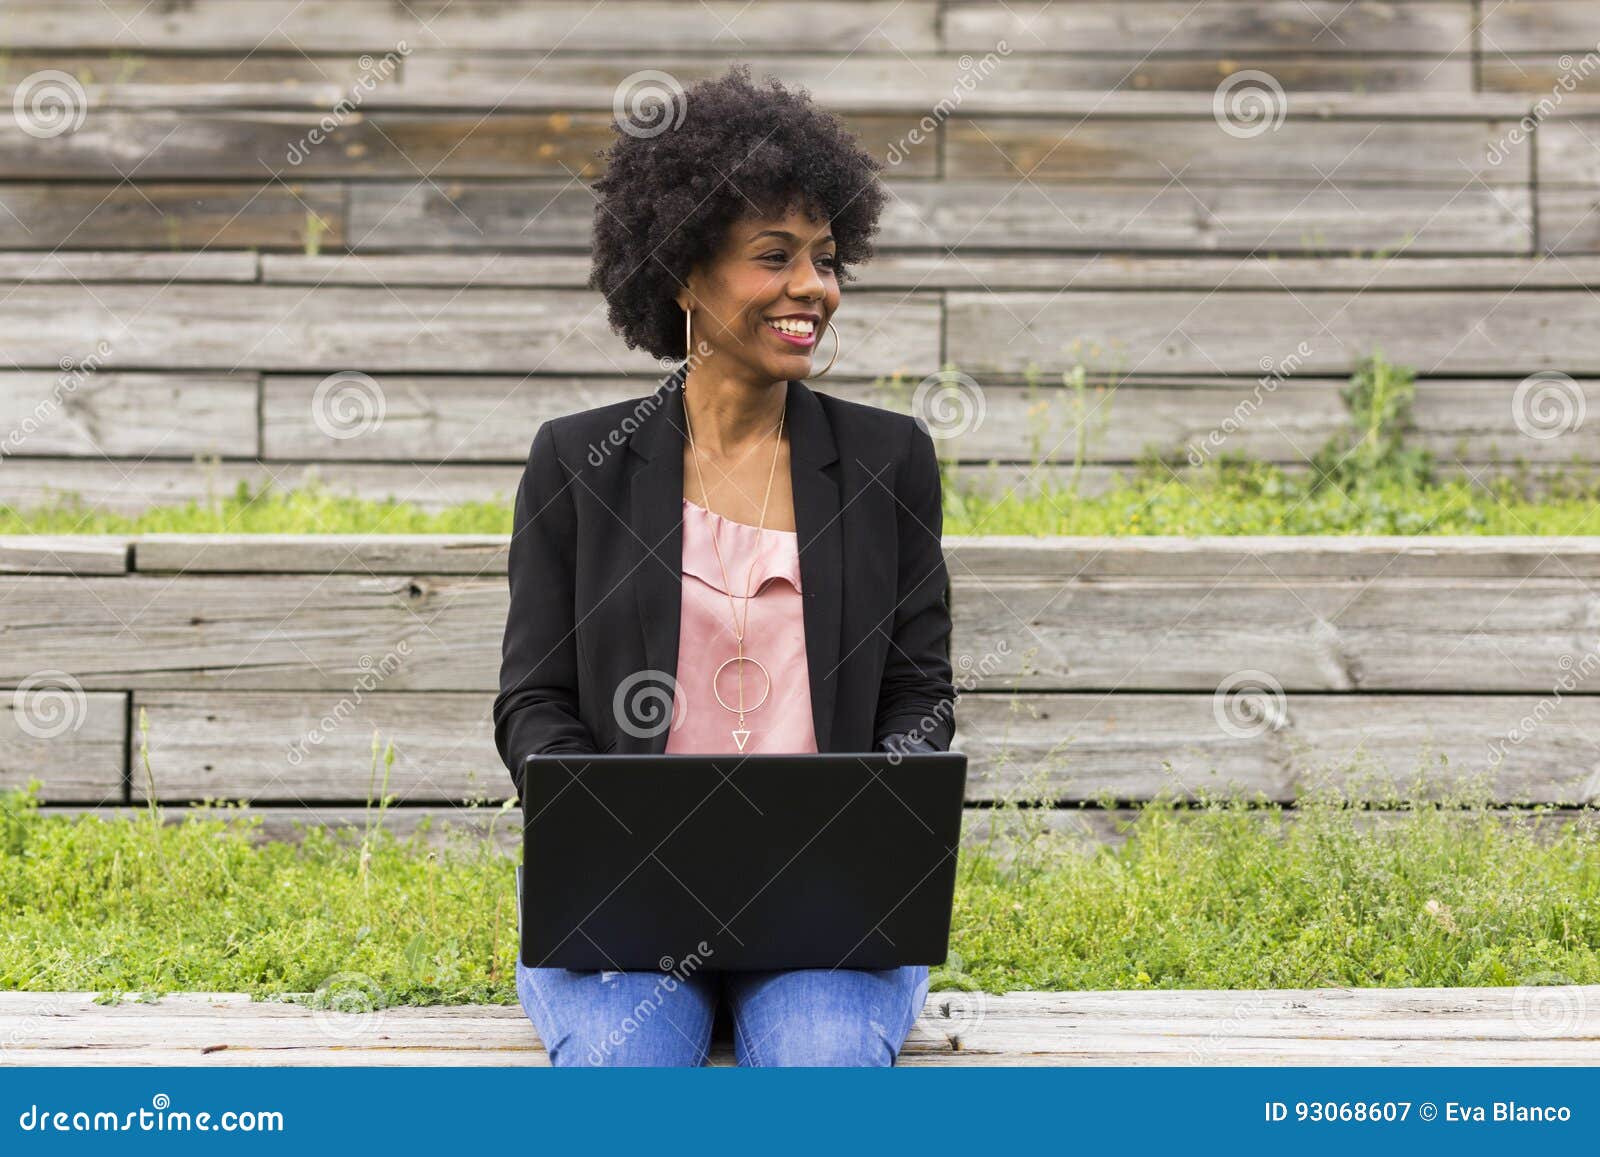 young afro american woman using laptop. green backgrounds. casual clothing. lifestyles. business.millennial.